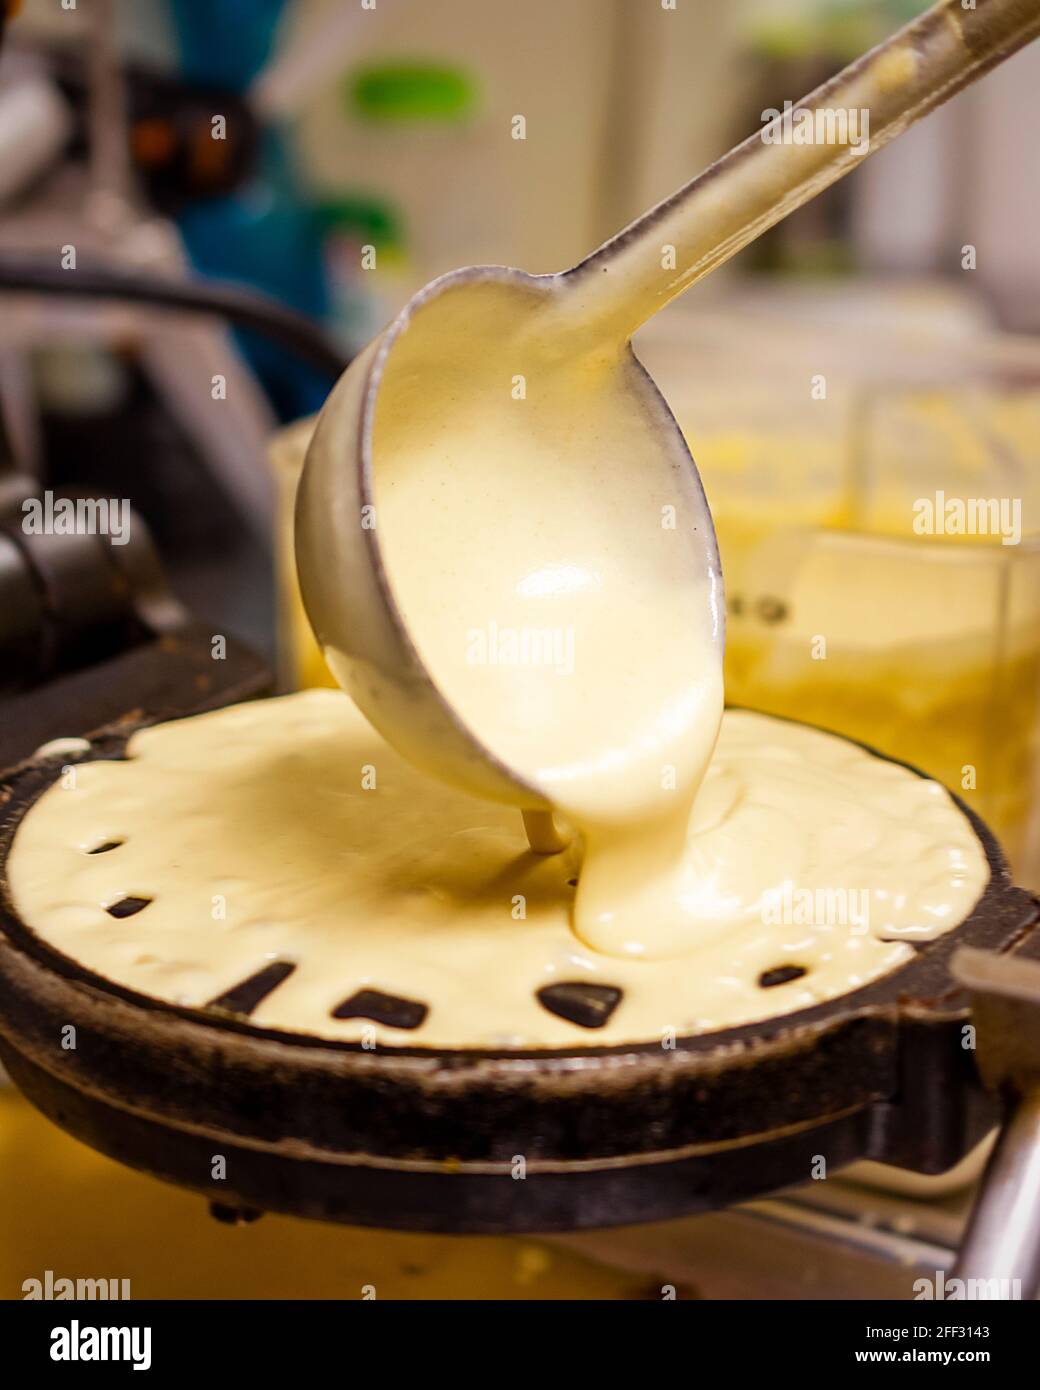 Waffle batter is being poured via ladel onto hot commercial waffle iron in a diner. Stock Photo